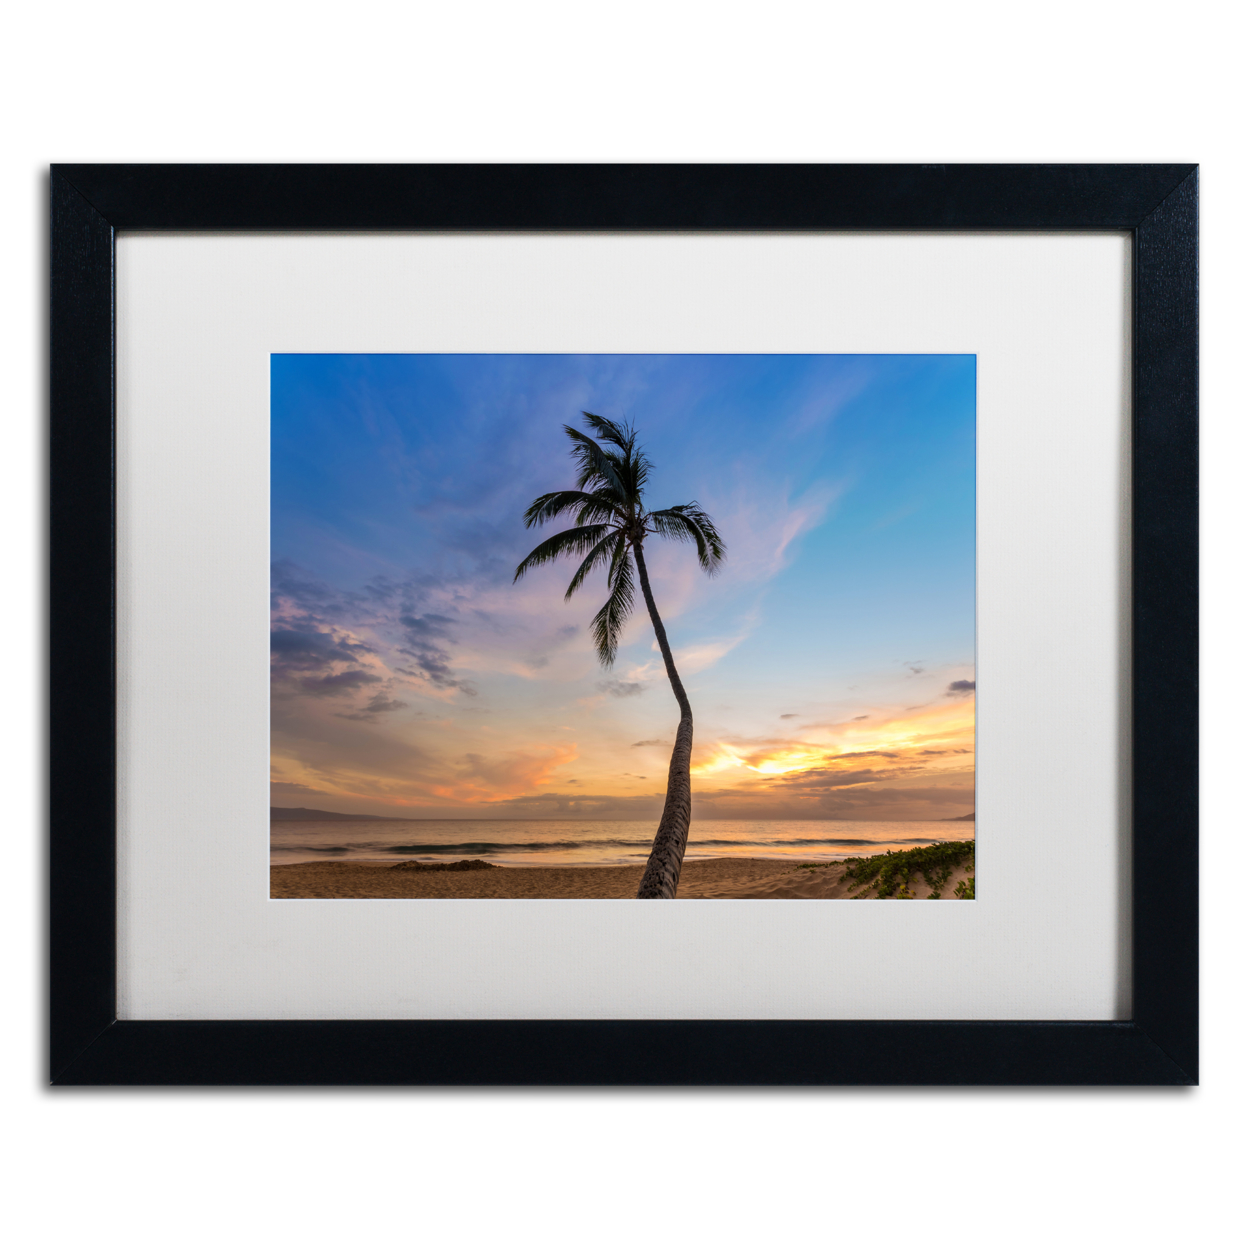 Pierre Leclerc 'Sunset Palm Tree' Black Wooden Framed Art 18 X 22 Inches